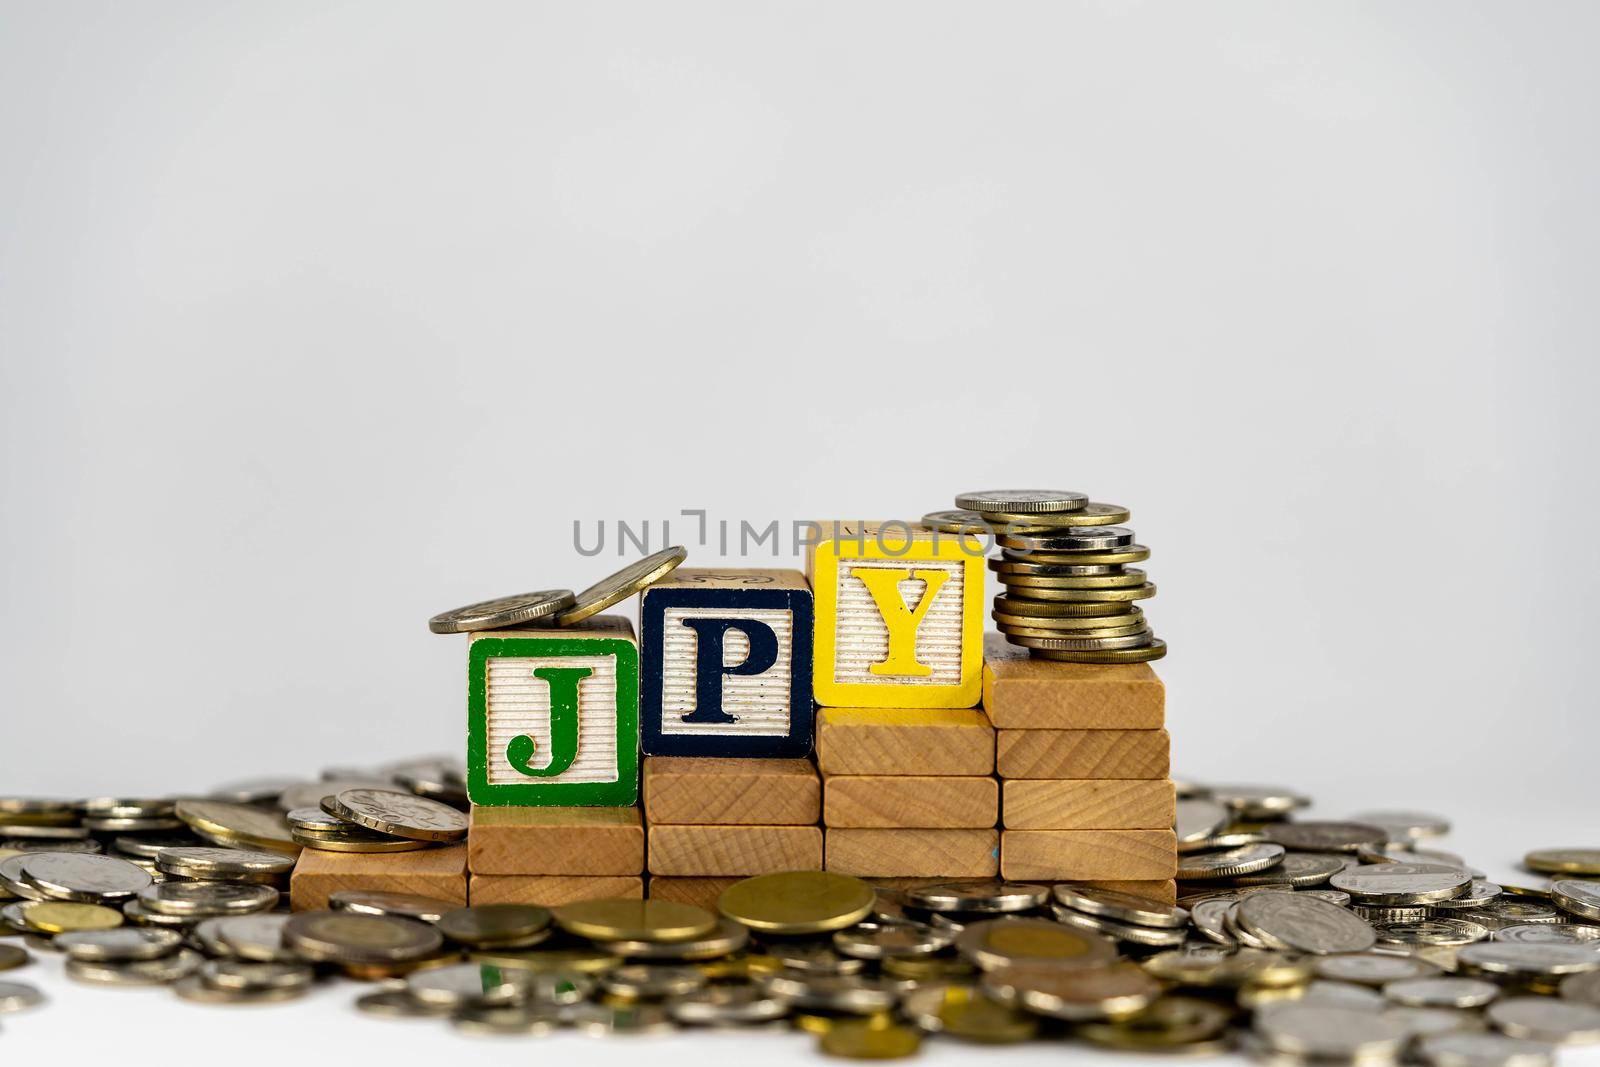 Forex JPY concept with wooden blocks and coins. Forx JPY letters on wooden blocks sorrounded with money by billroque